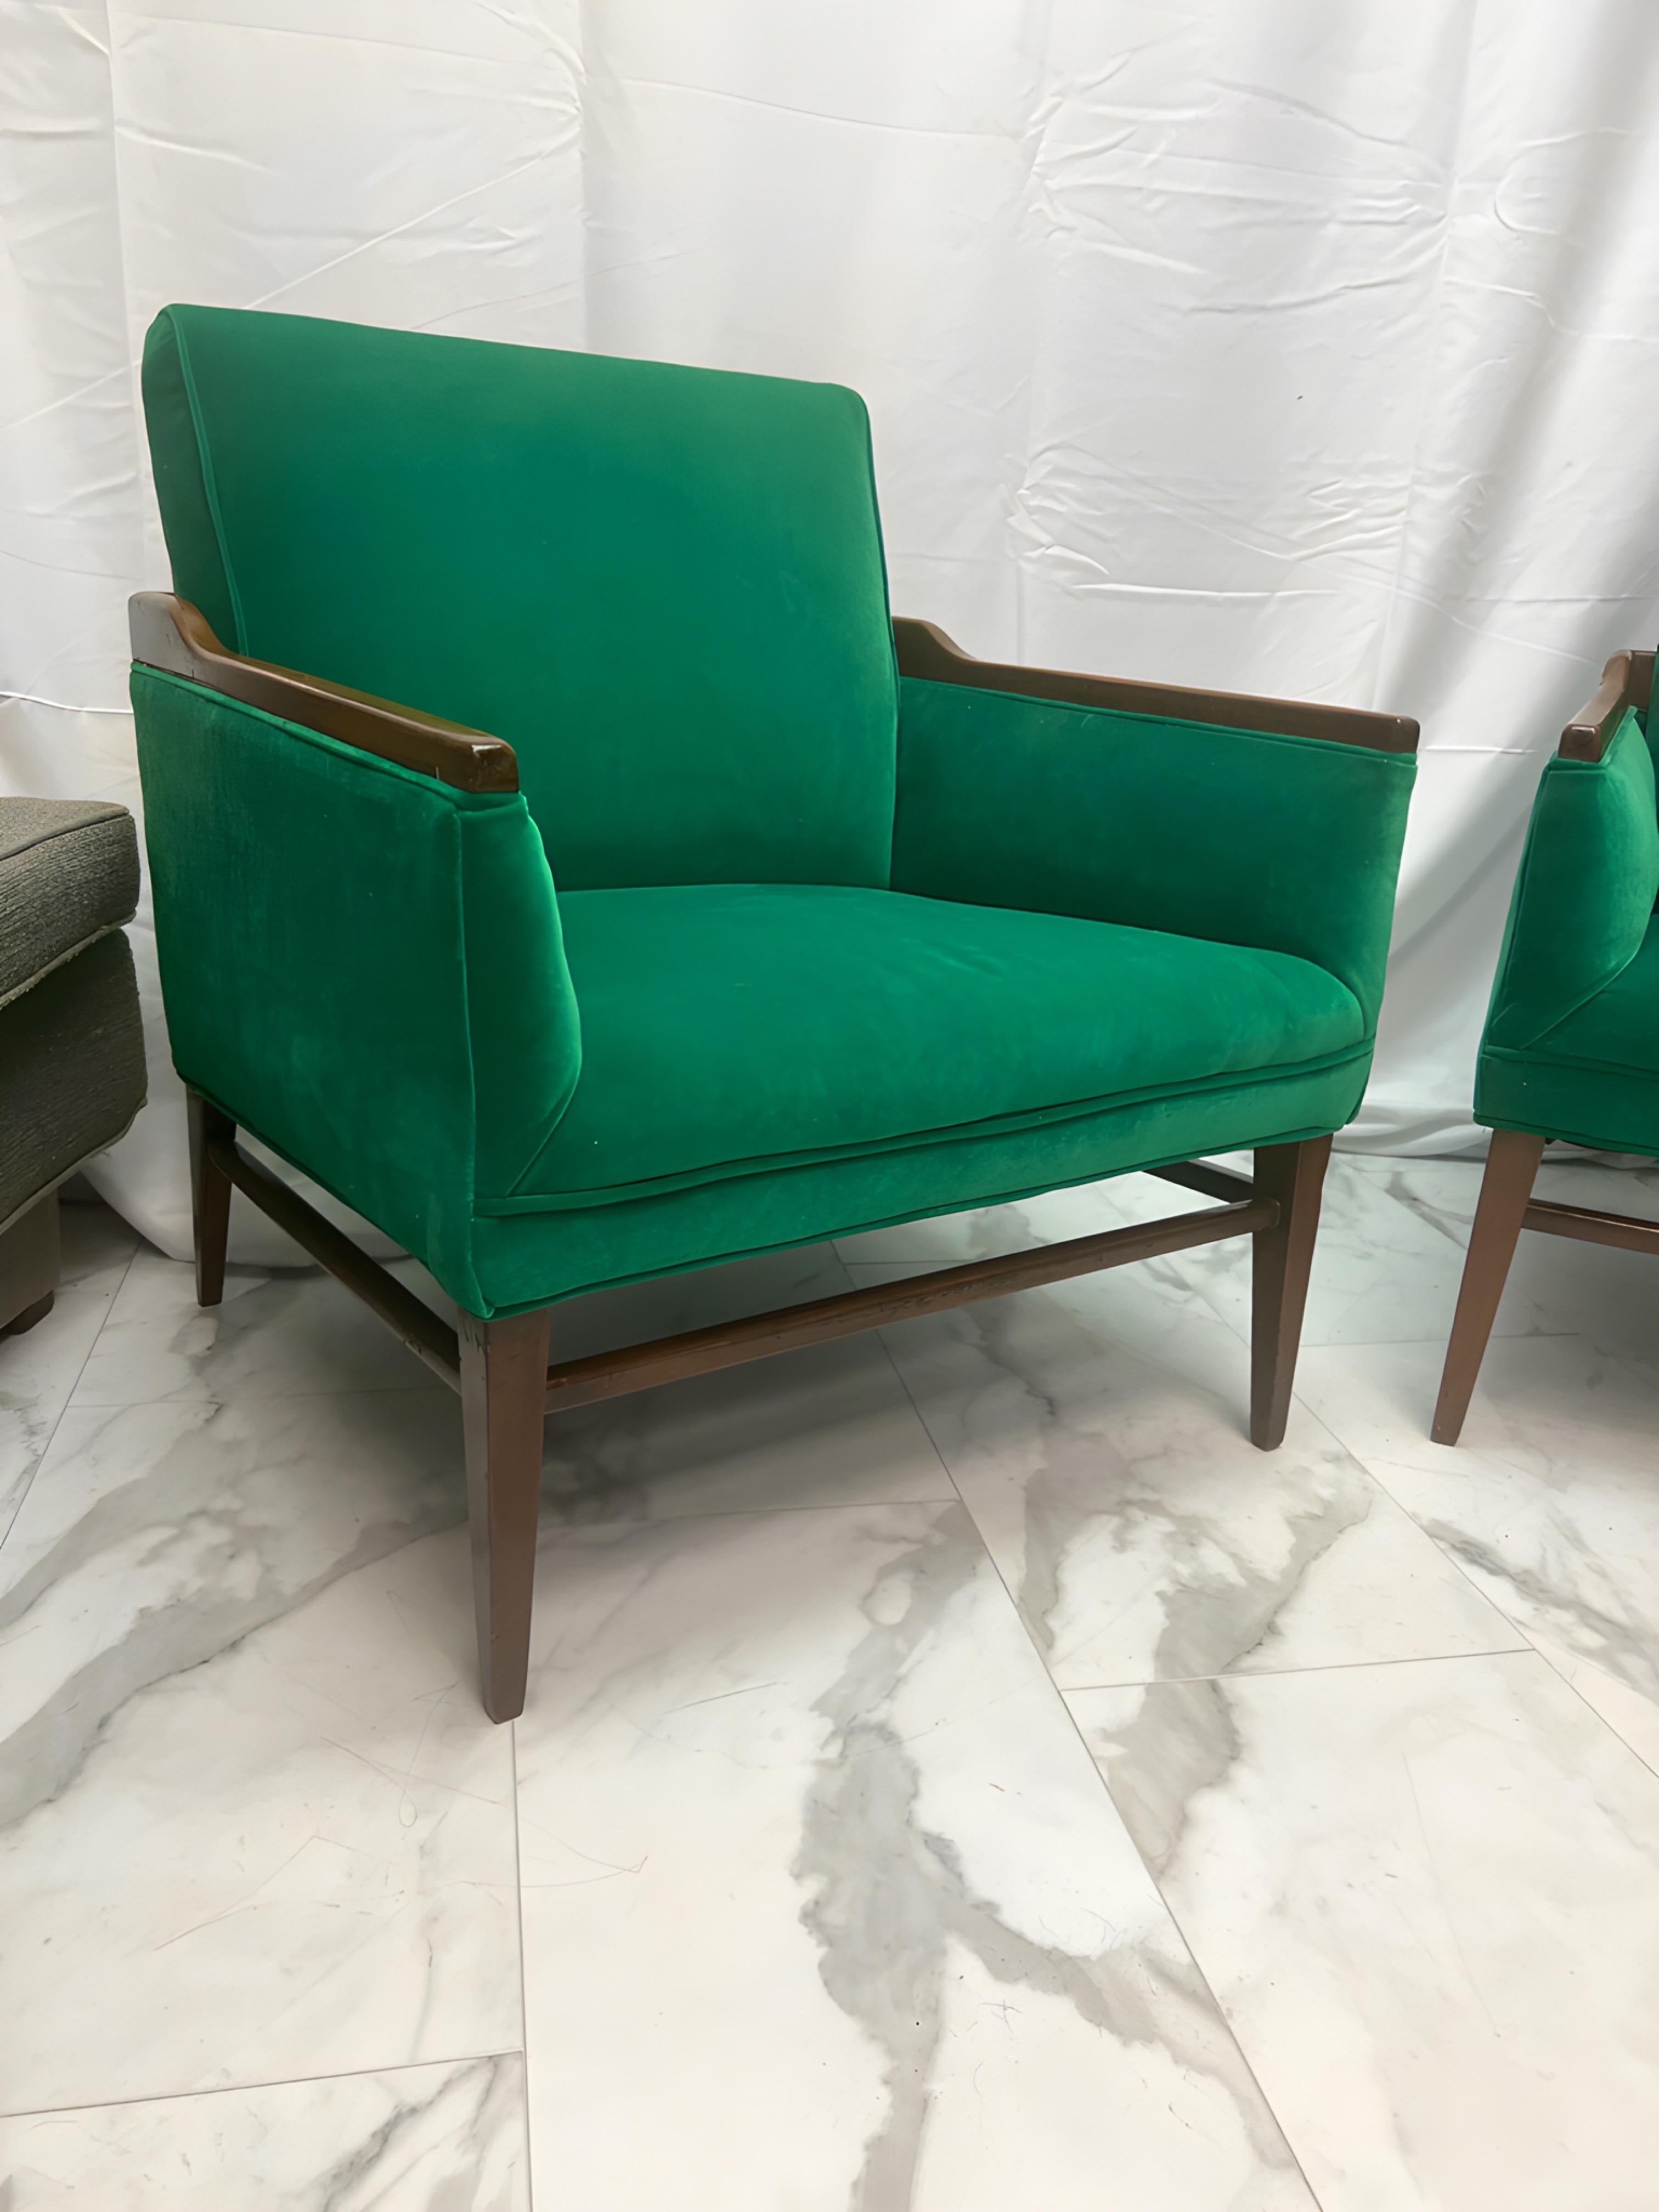 These fabulous chairs have been previously reupholstered in a  Kelly green performance velvet.  The chair’s arms and the top of the back are accentuated with walnut and have a walnut stretcher across the front 2 legs and on the legs going front to